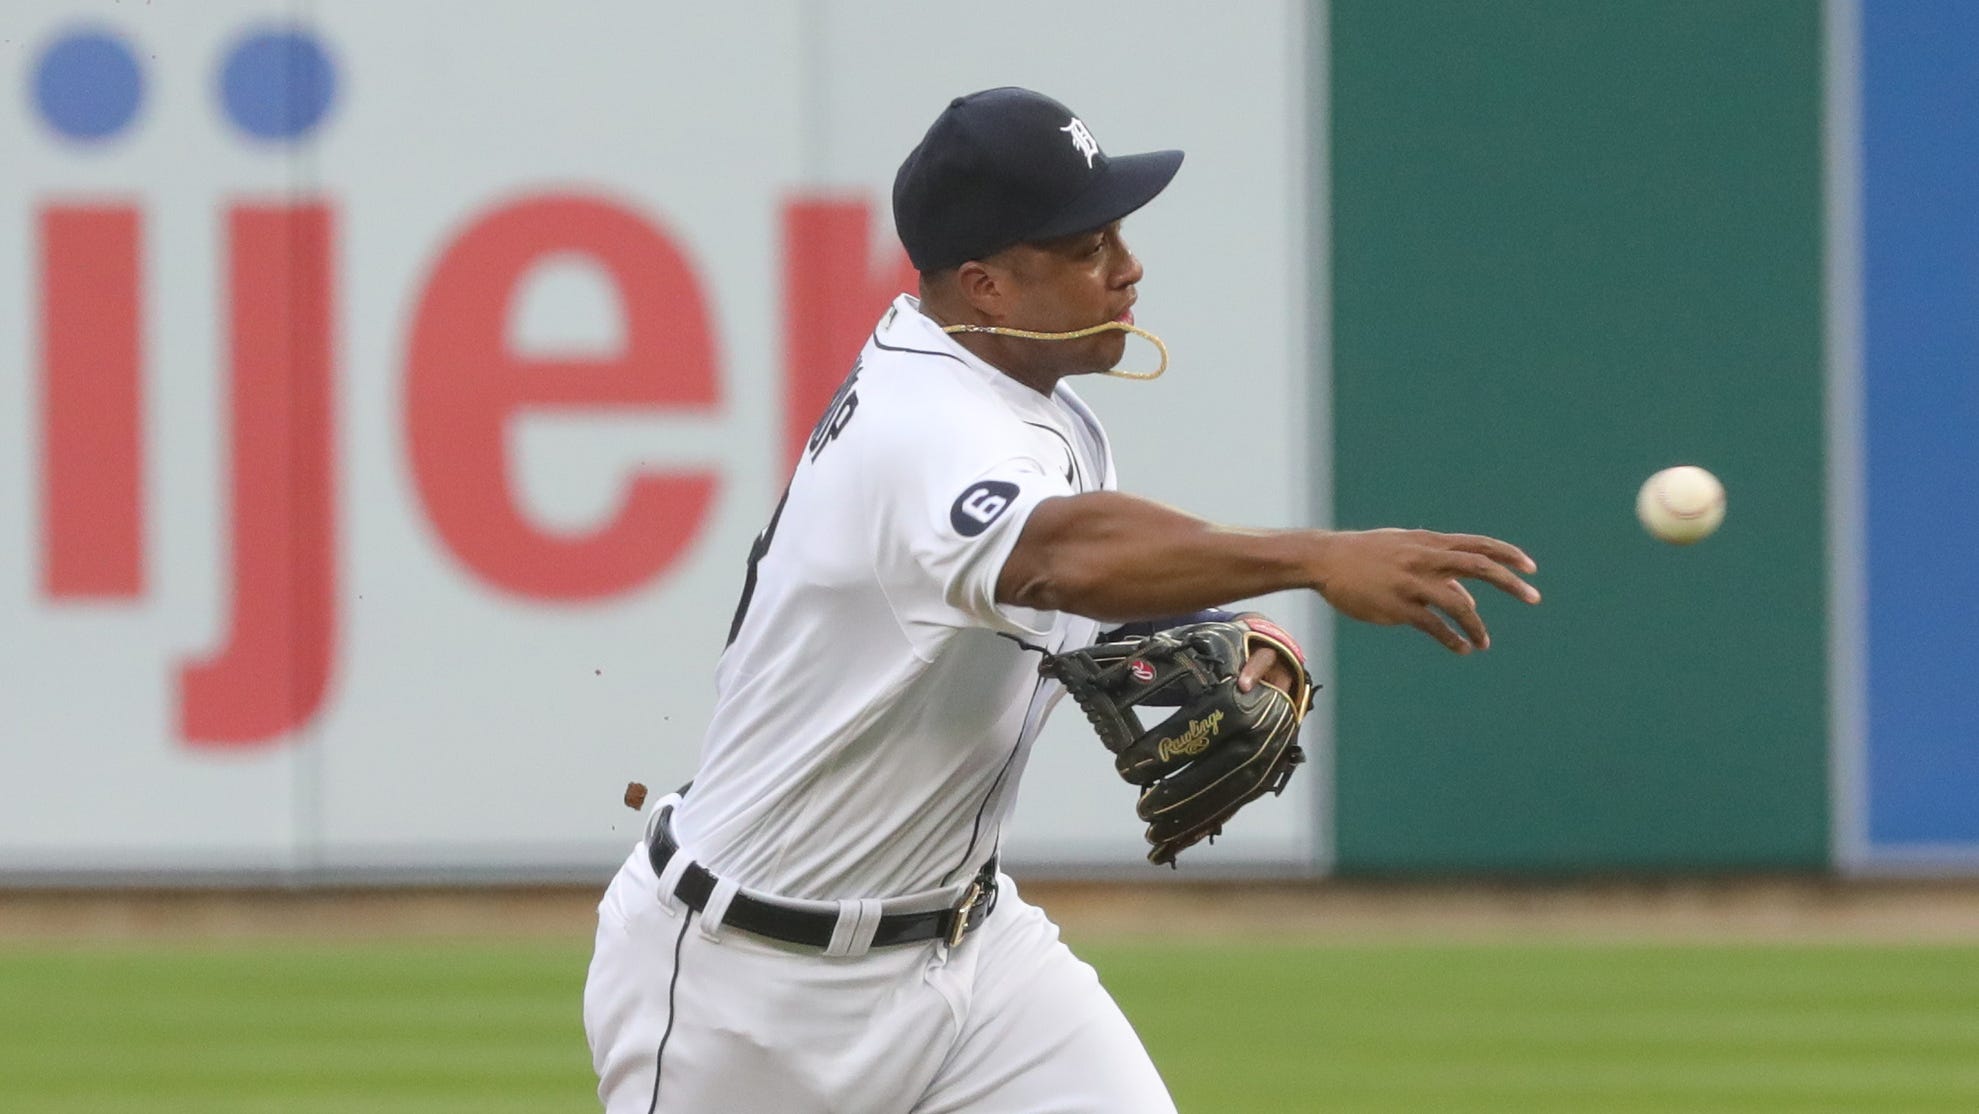 Tigers second baseman Jonathan Schoop throws White Sox catcher Yasmani Grandal out at first base during the second inning at Comerica Park on Monday, August 10, 2020.